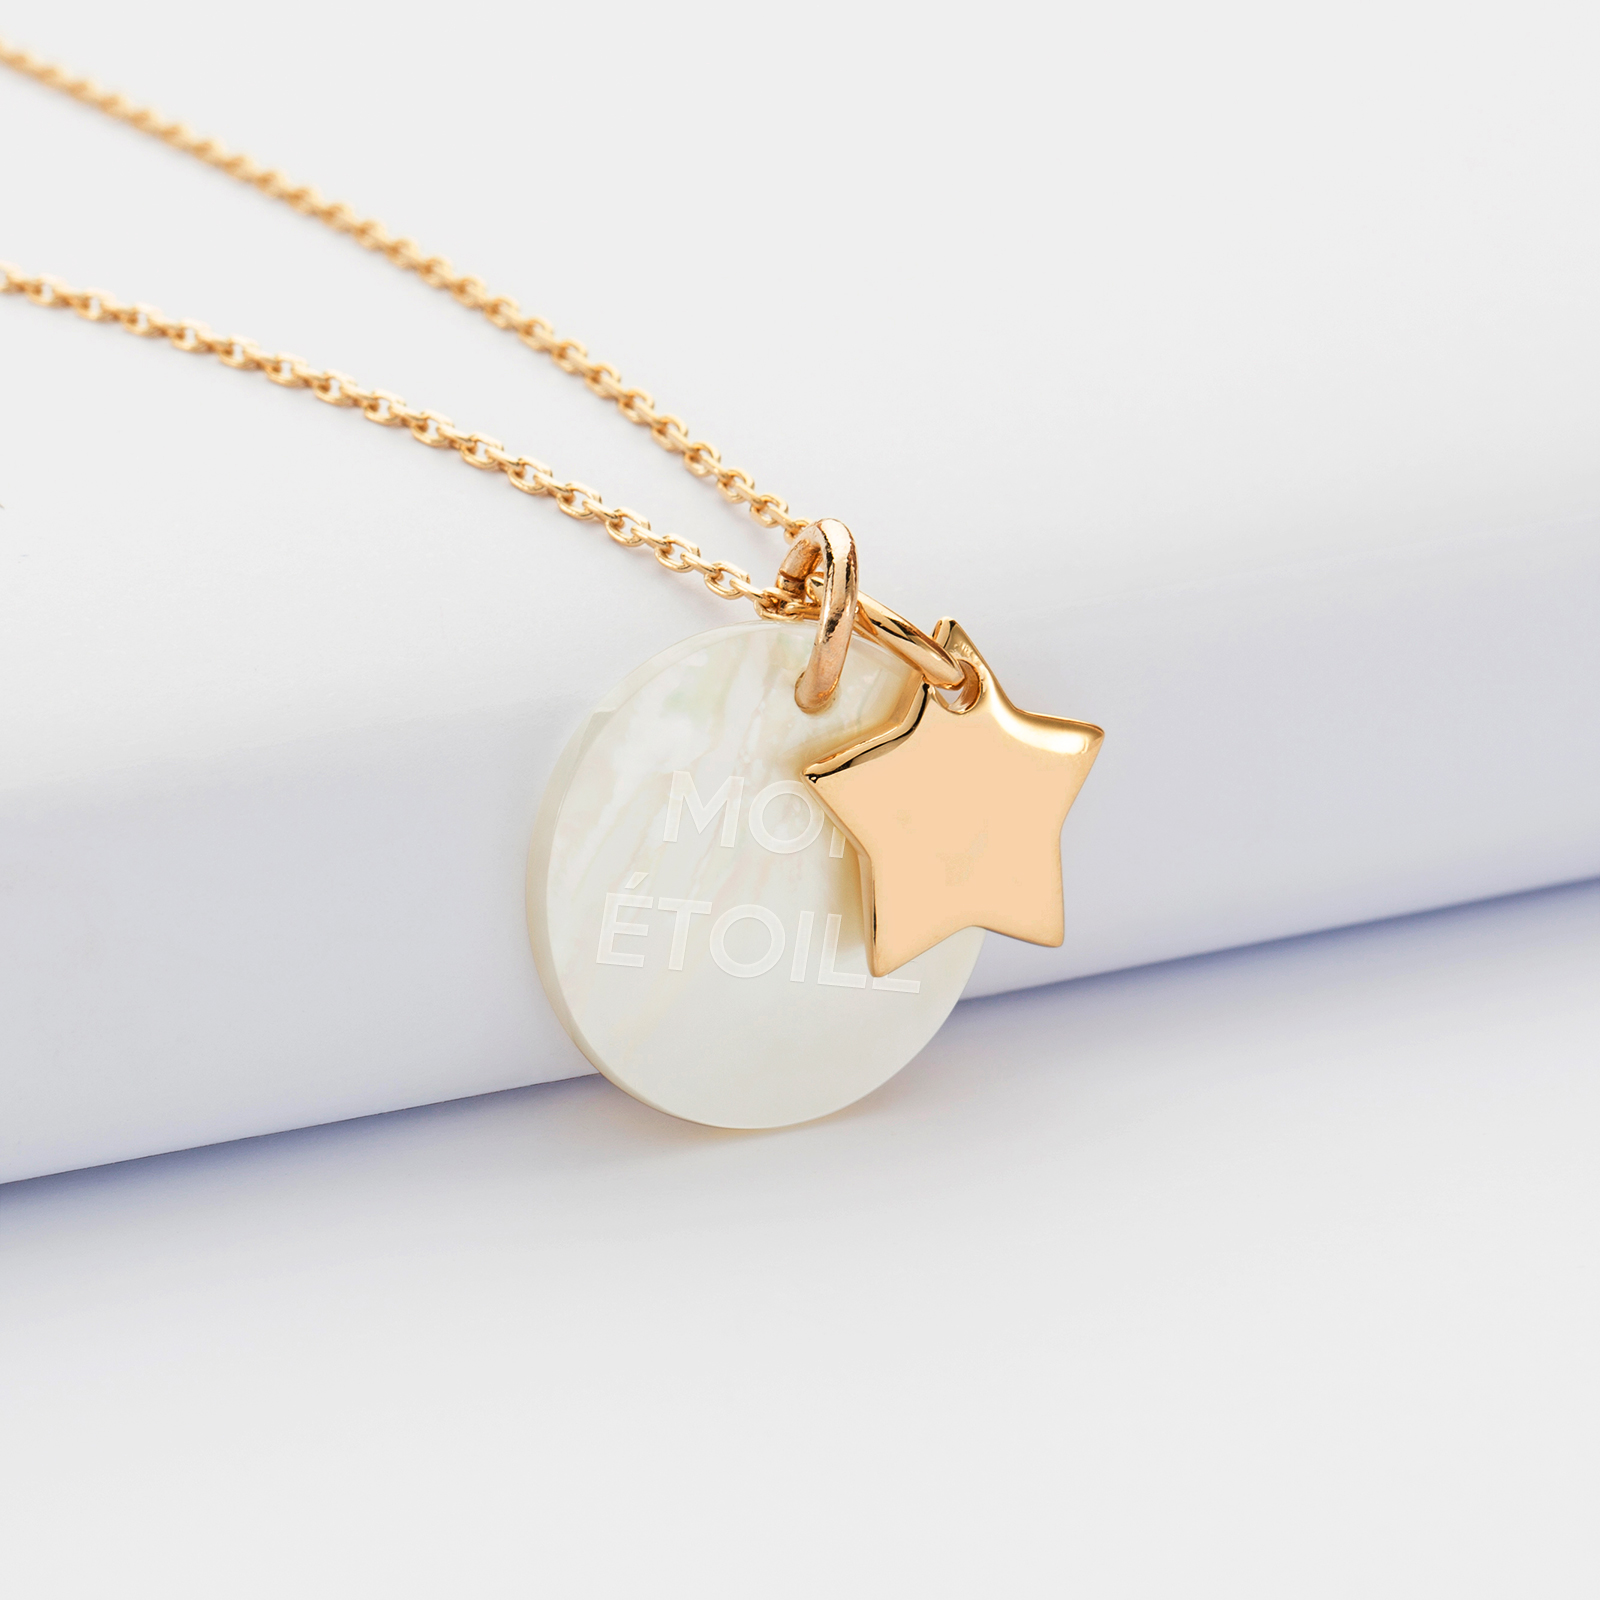 Personalised engraved mother-of-pearl medallion pendant 19 mm and gold-plated star charm 12 mm - text